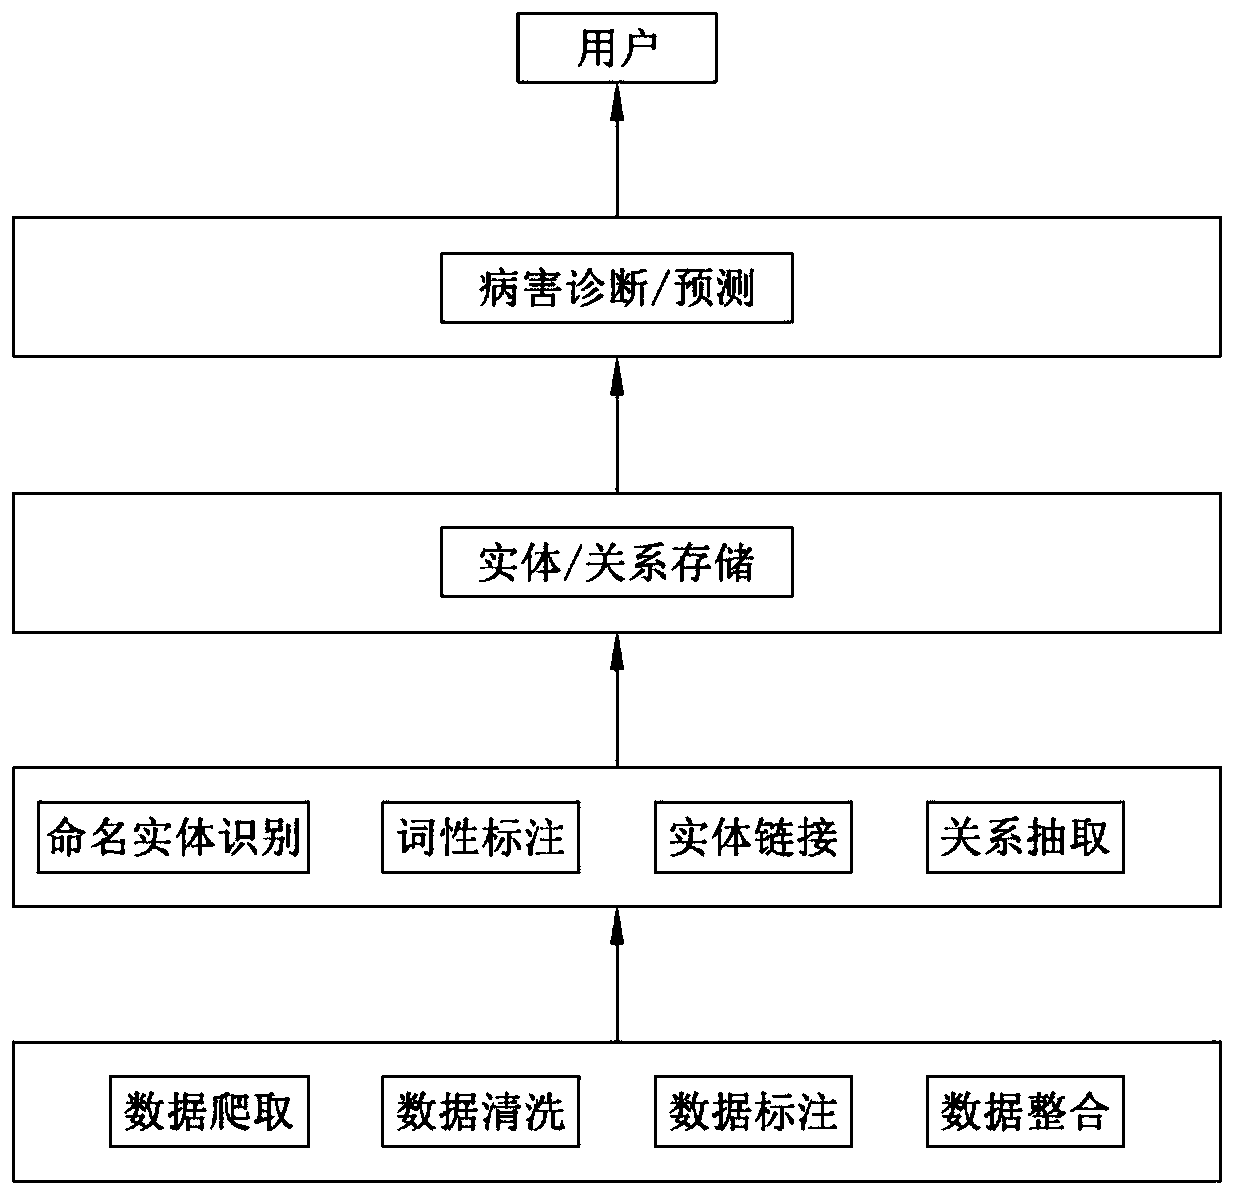 Rice disease prediction and diagnosis method based on knowledge graph